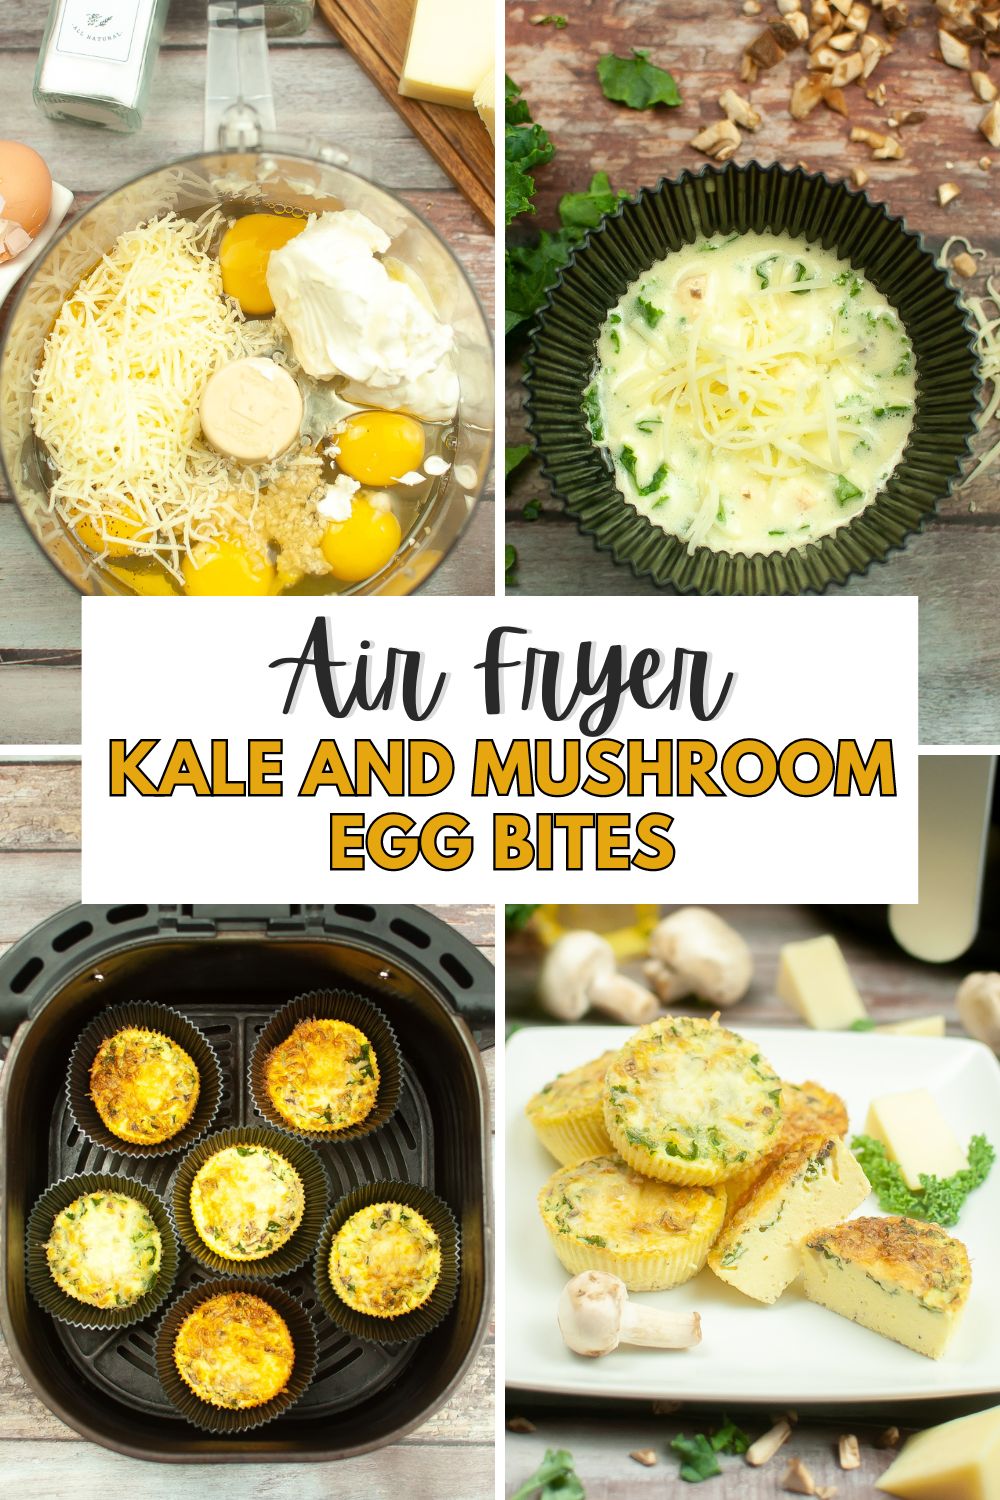 Delicious and nutritious breakfast bites packed with kale and mushrooms.